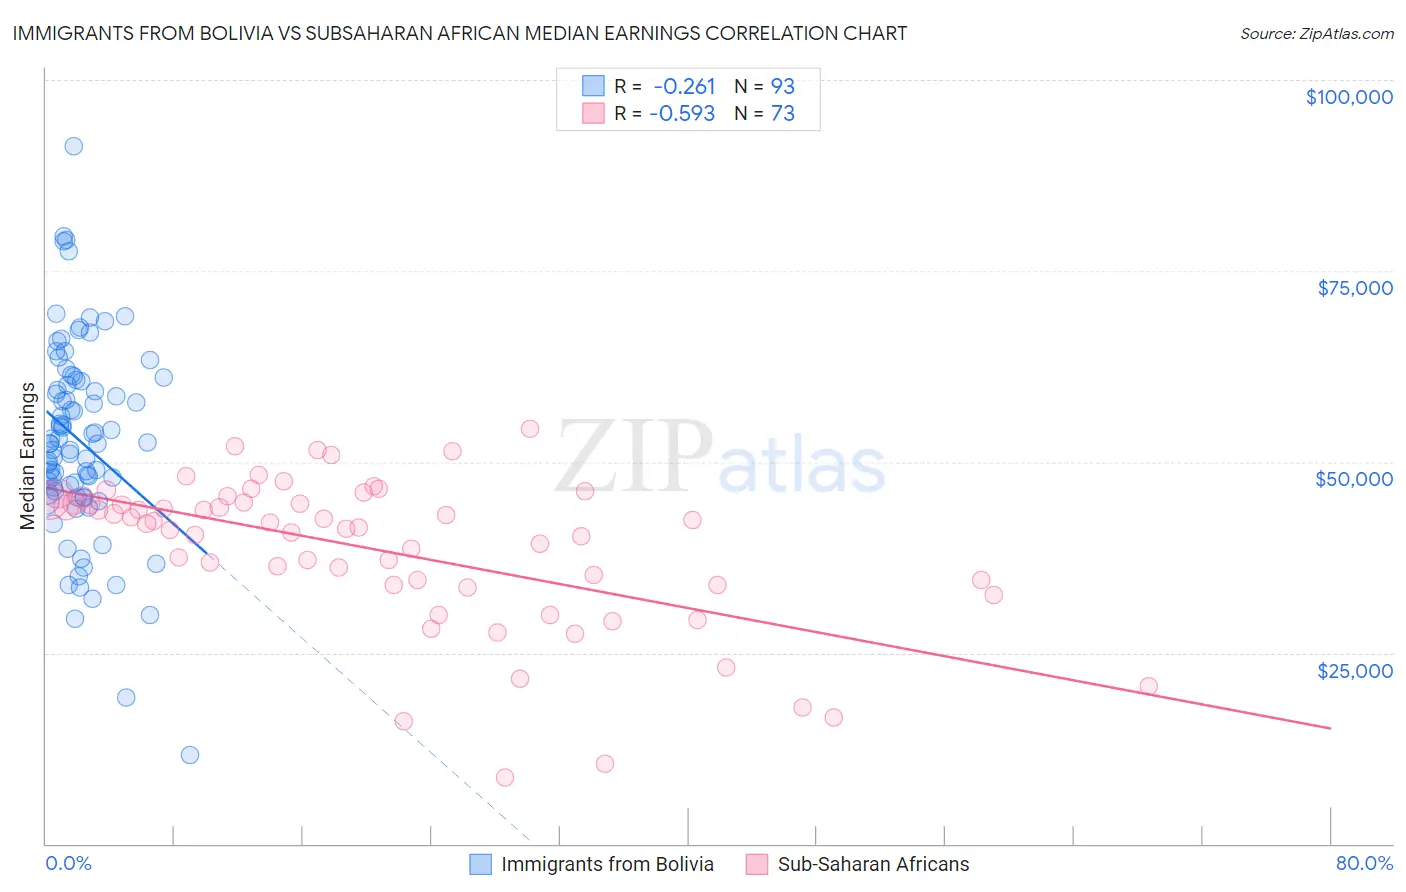 Immigrants from Bolivia vs Subsaharan African Median Earnings